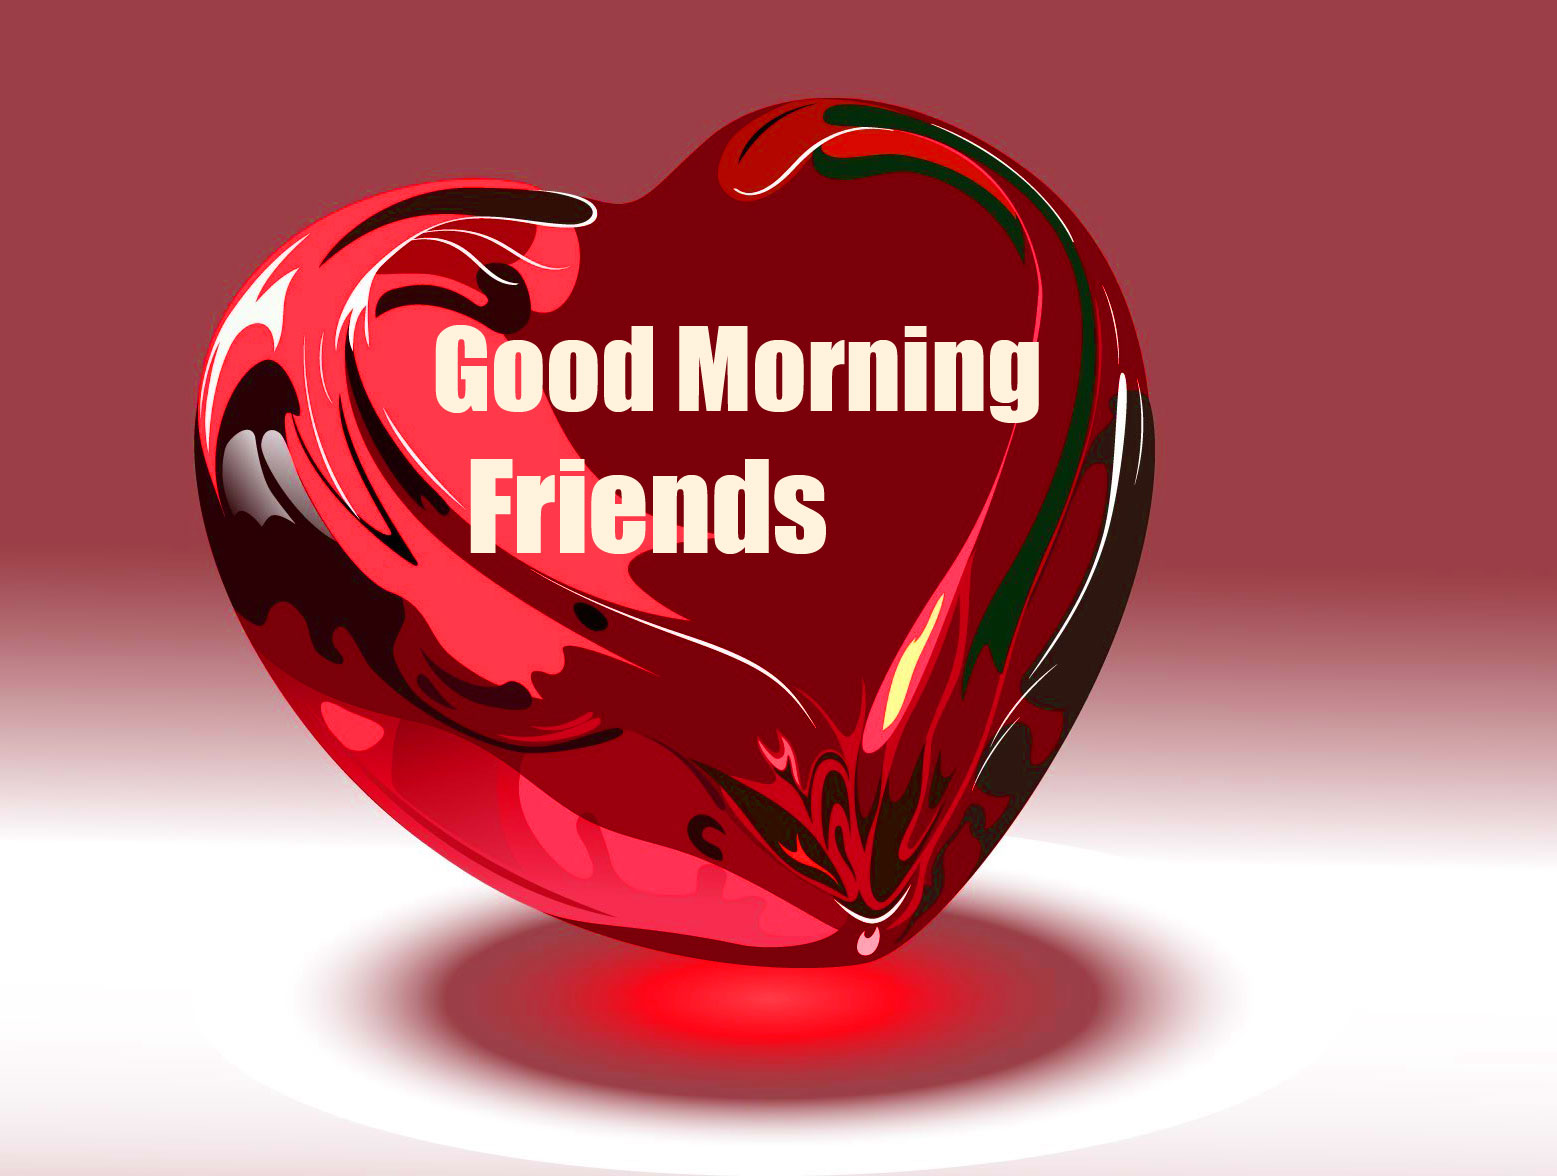 Good Morning Friends Images Pics photo Download Free 